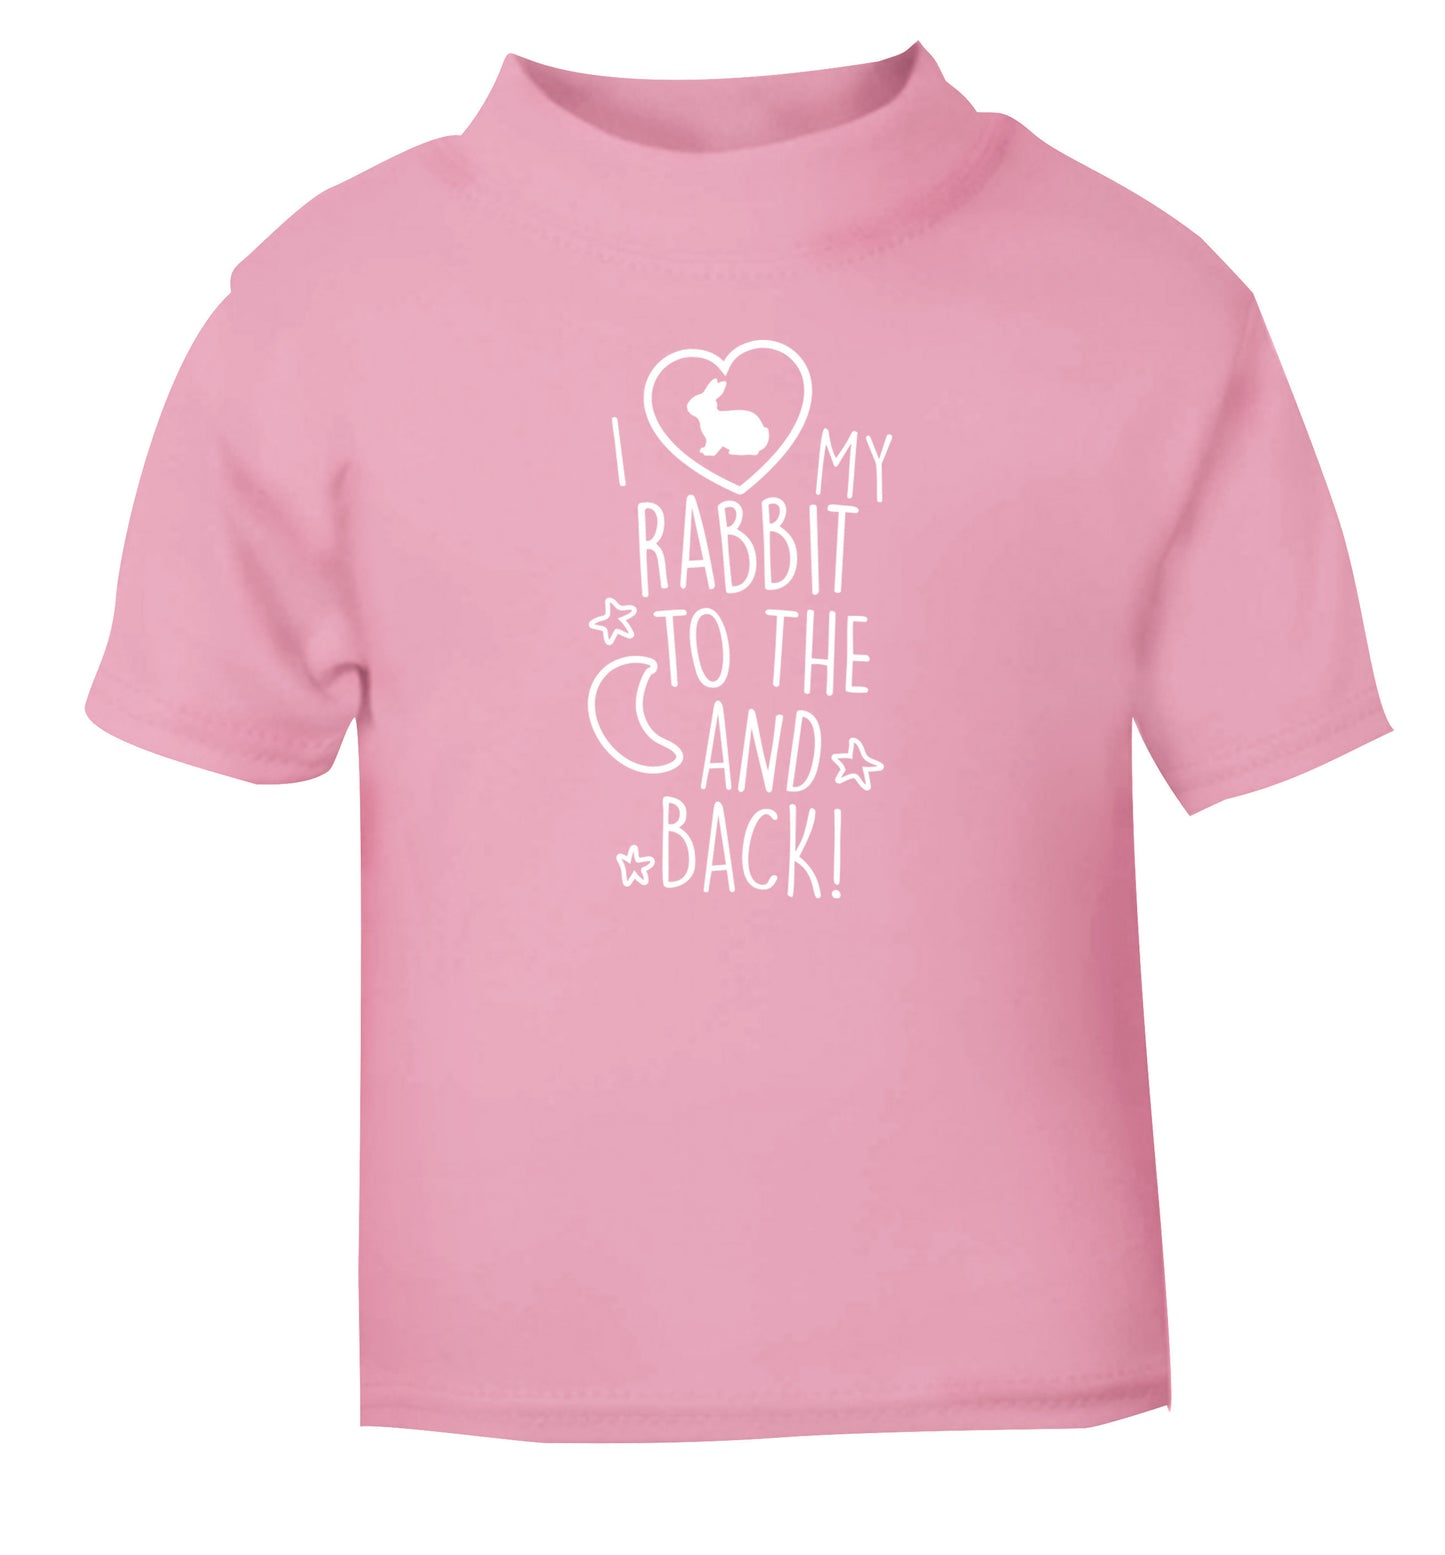 I love my rabbit to the moon and back light pink Baby Toddler Tshirt 2 Years